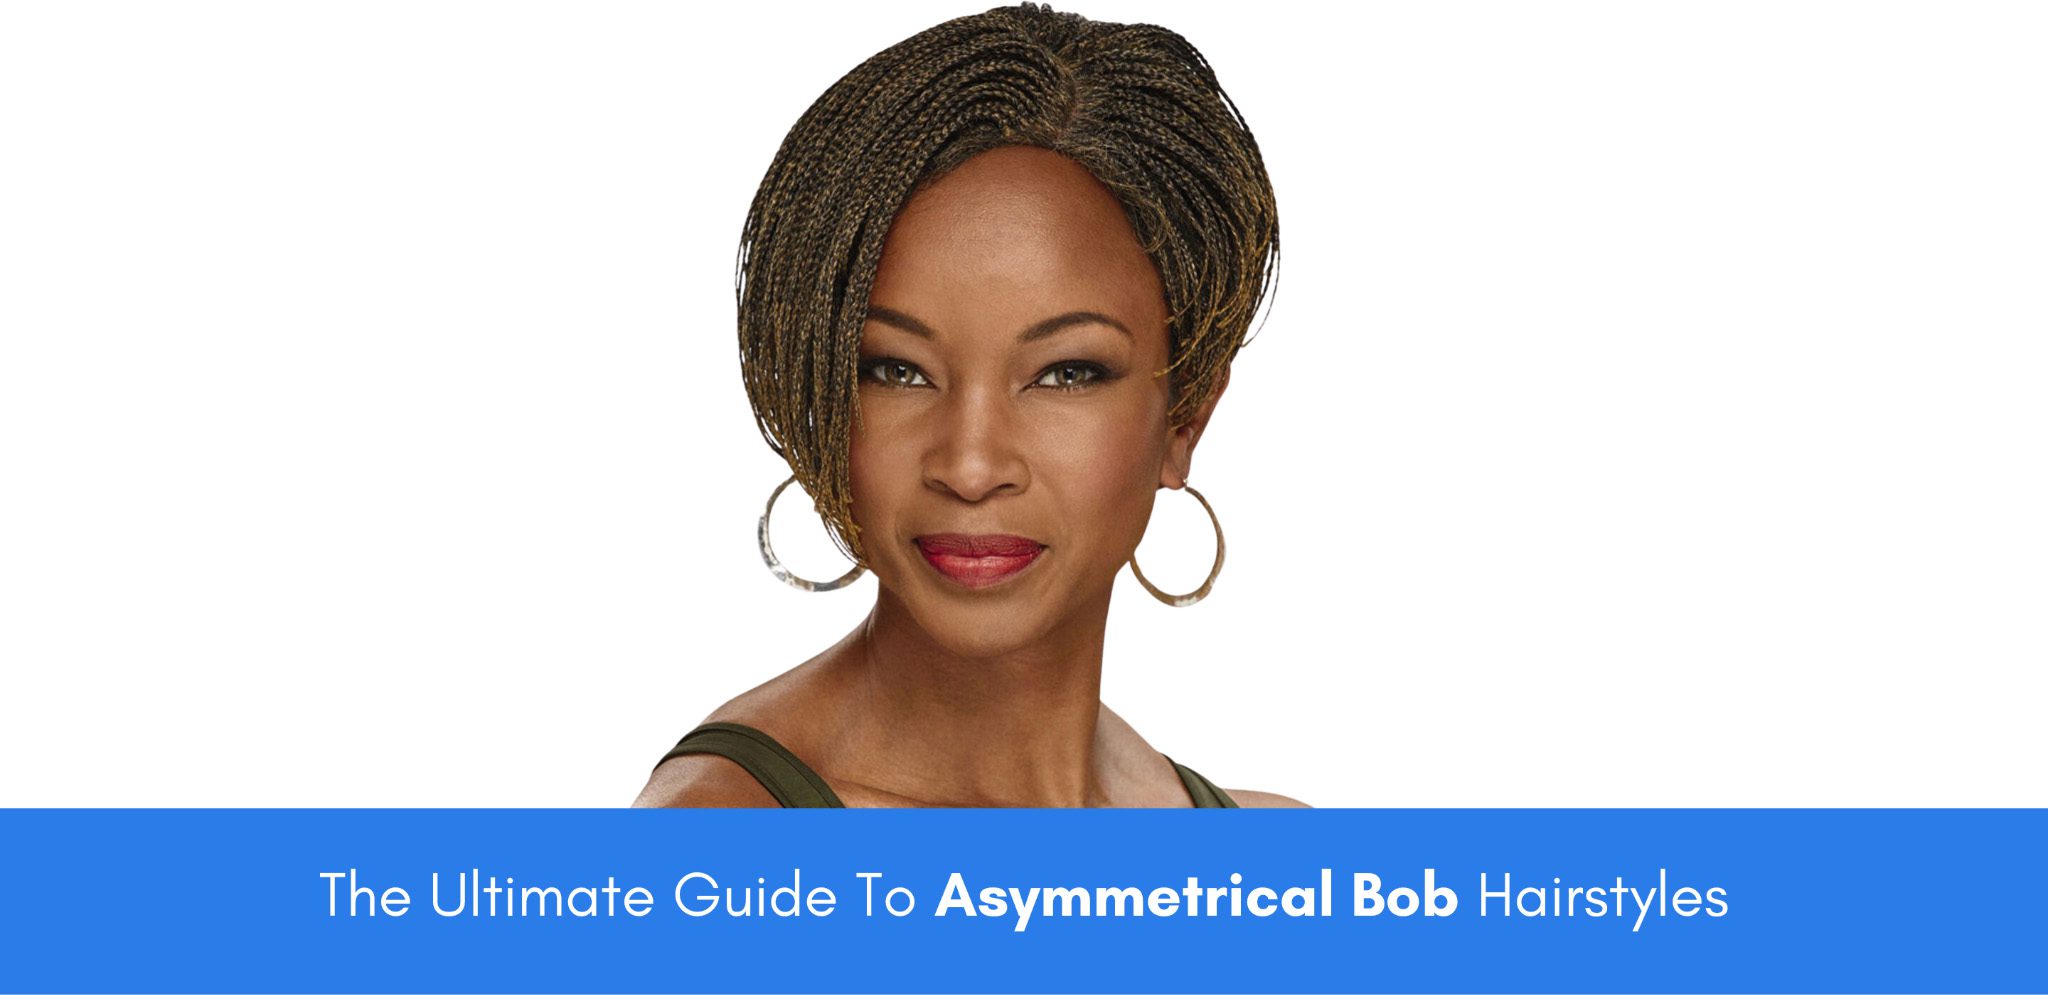 The Ultimate Guide To Asymmetrical Bob Hairstyles